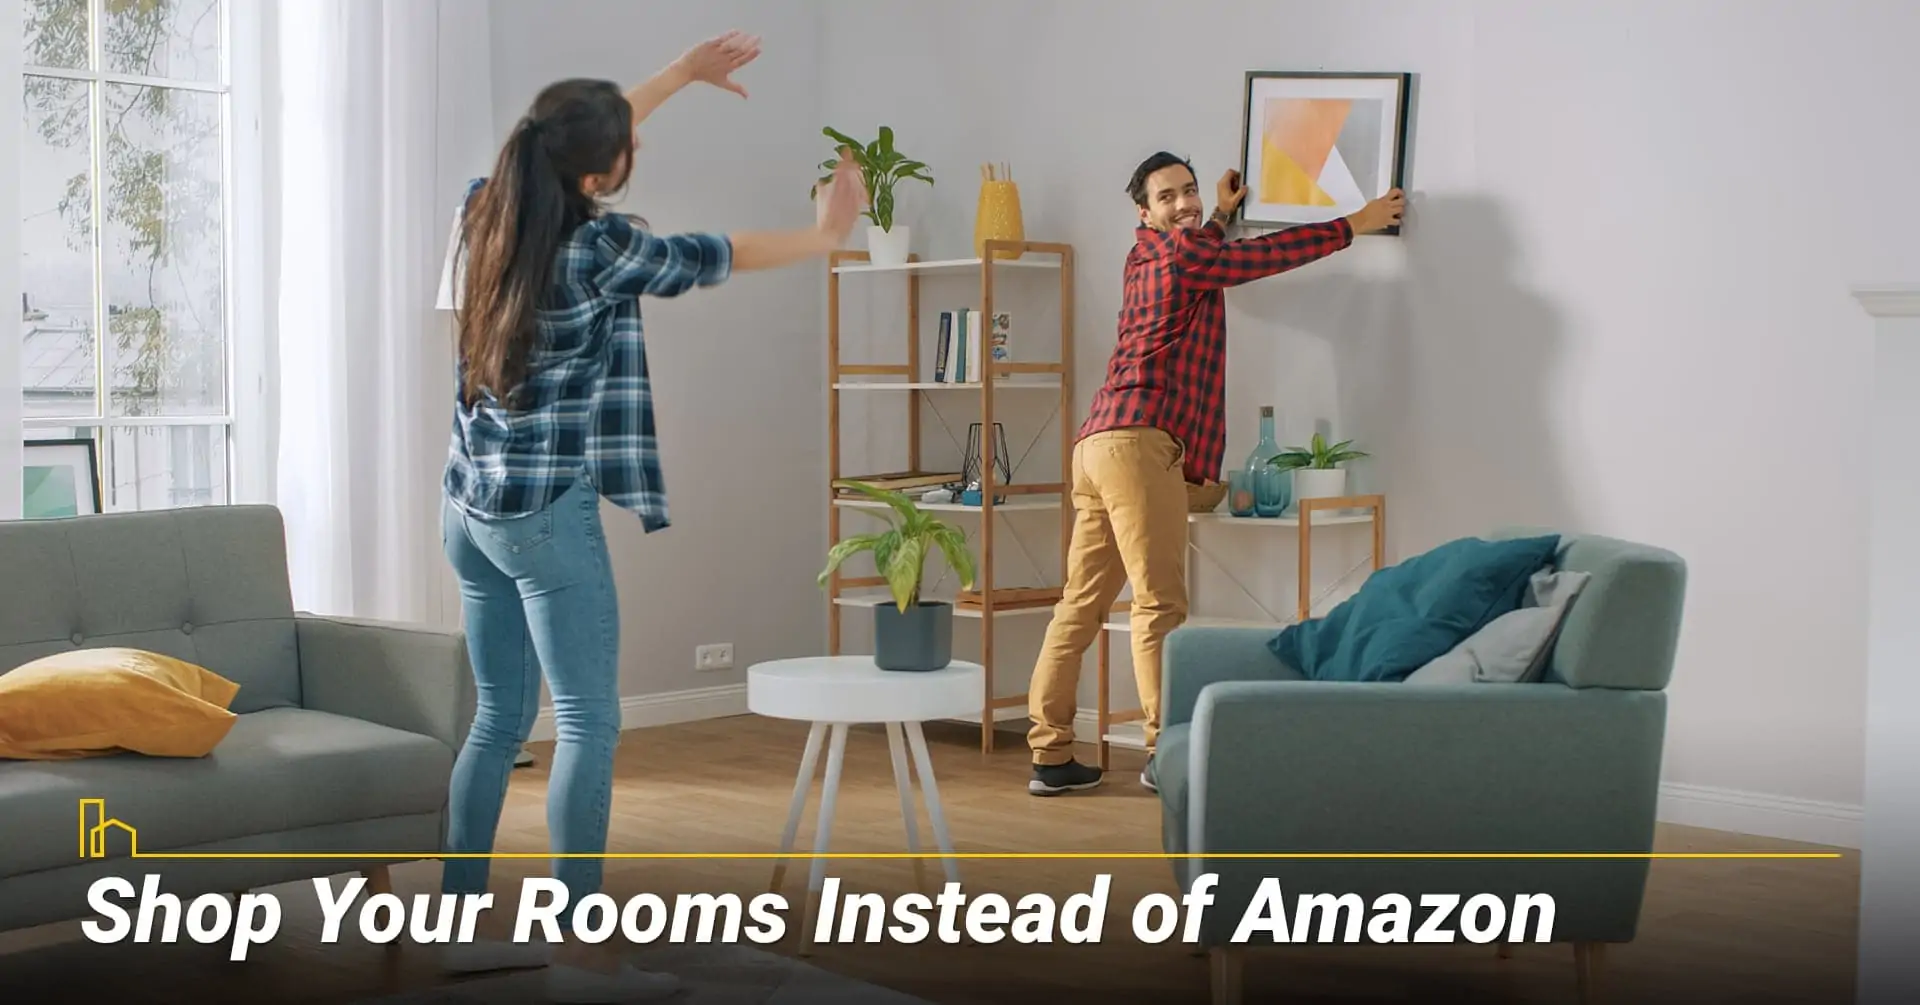 Shop Your Rooms Instead of Amazon, re-purpose existing items or furniture around the house